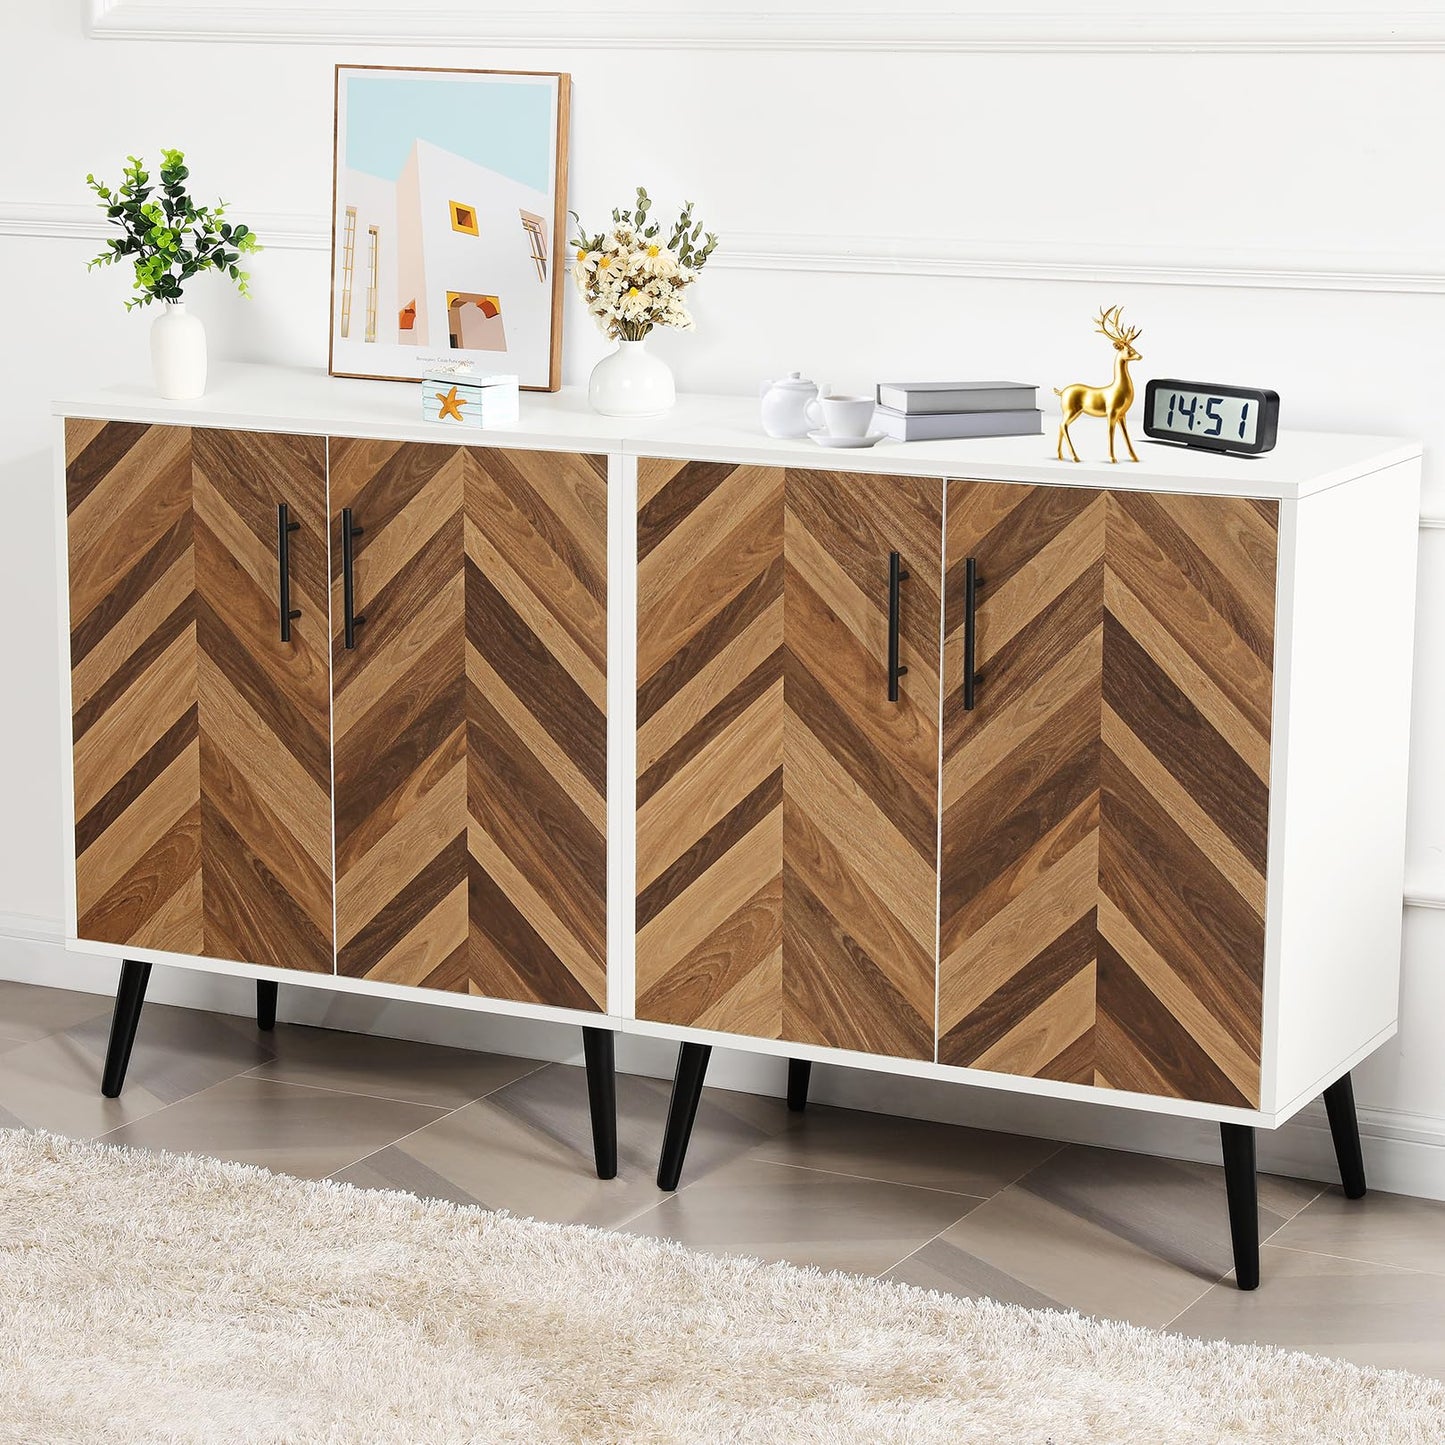 Likein Modern Storage Cabinet with 2 Doors, White Accent Cabinet with Storage, Free Standing Wooden Sideboard Buffet Cabinet with Adjustable Shelves